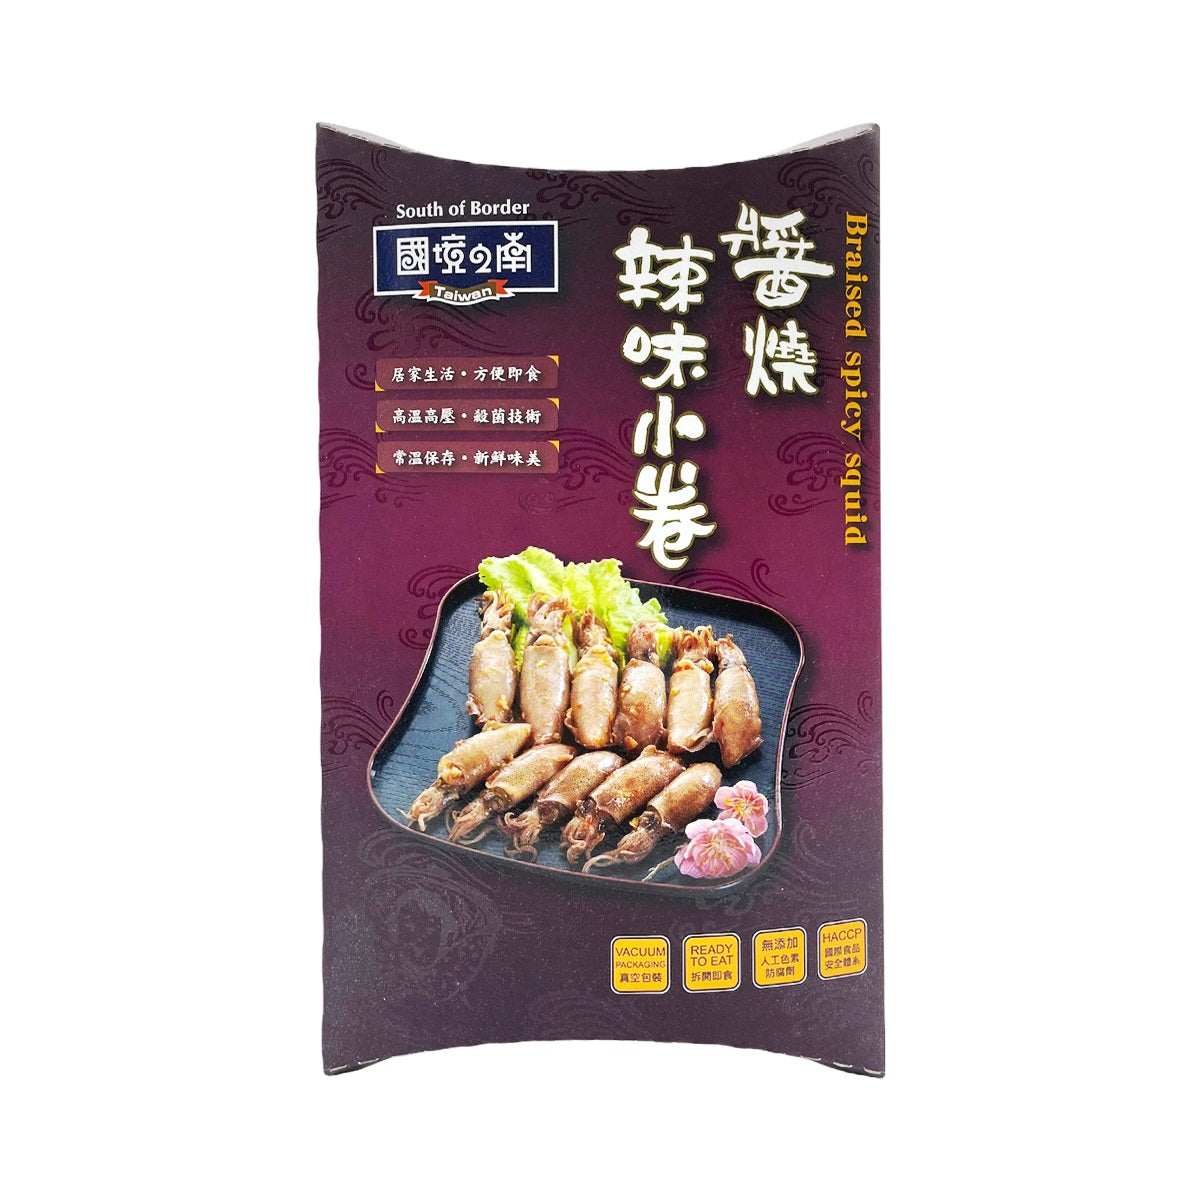 【D.E CHUNG HUA FOODS】 SOUTH OF BORDER Braised Spicy Squid 90g